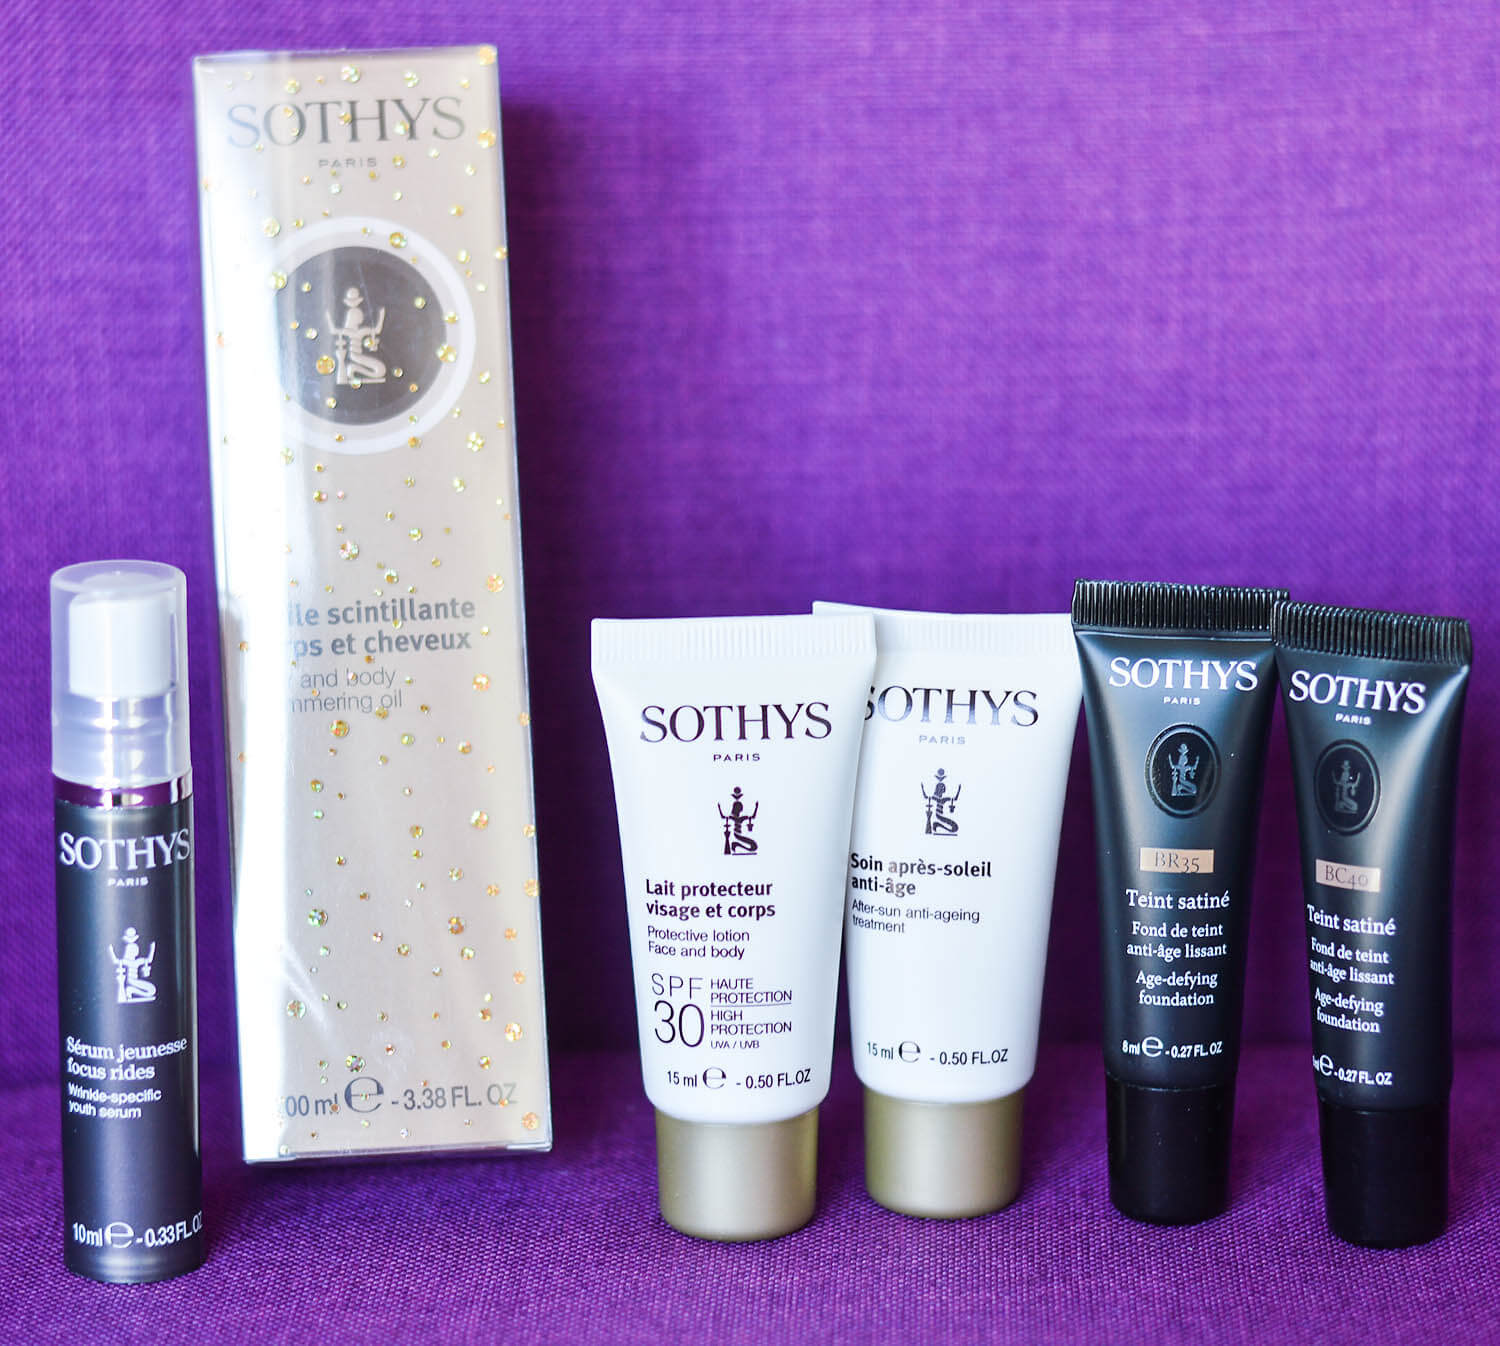 Kationette-Beautyblogger-Sothys-Box-Review-Lifestyle